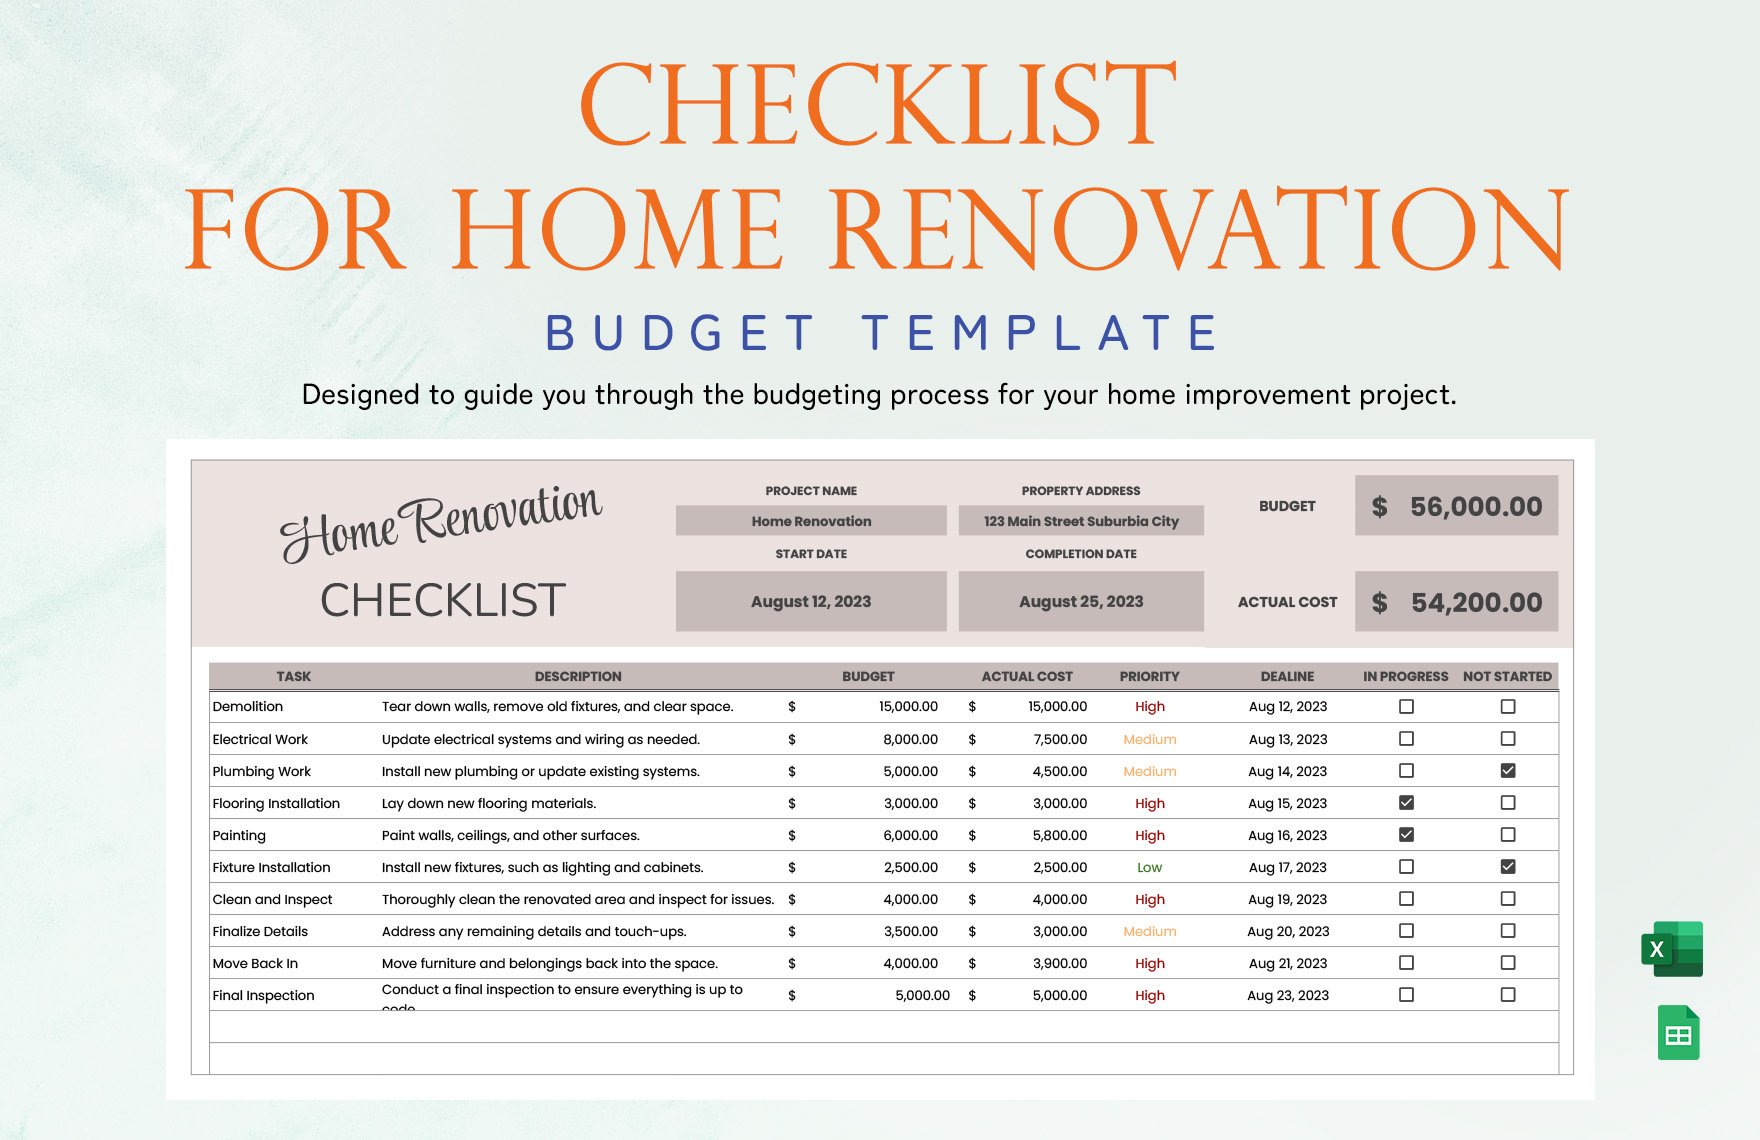 Free Checklist for Home Renovation Budget Template